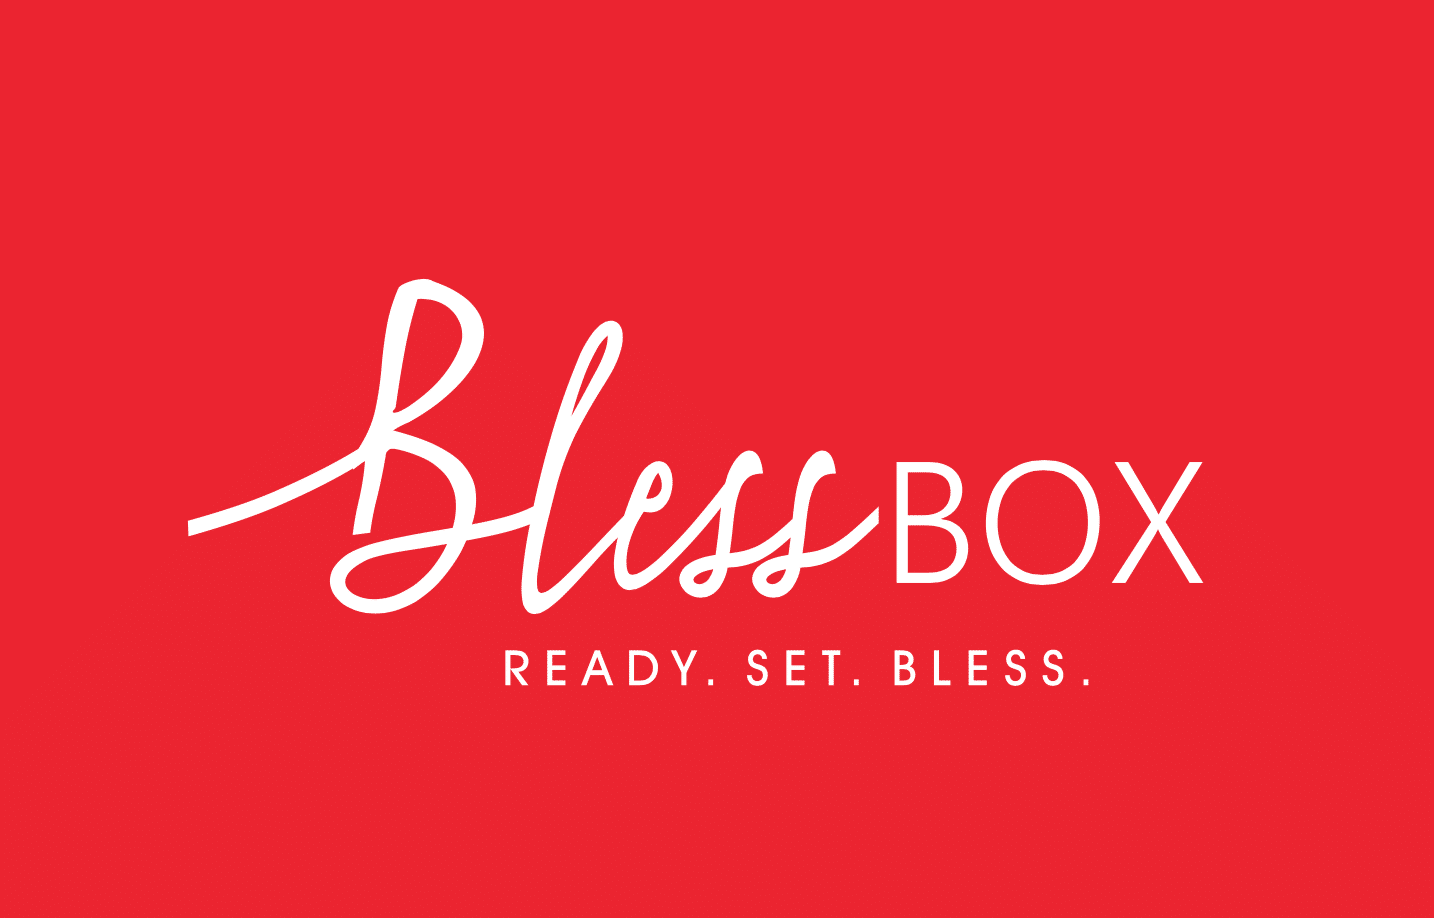 Today Only! Bless Box Coupon – 25% Off Your First Box + July Spoilers!